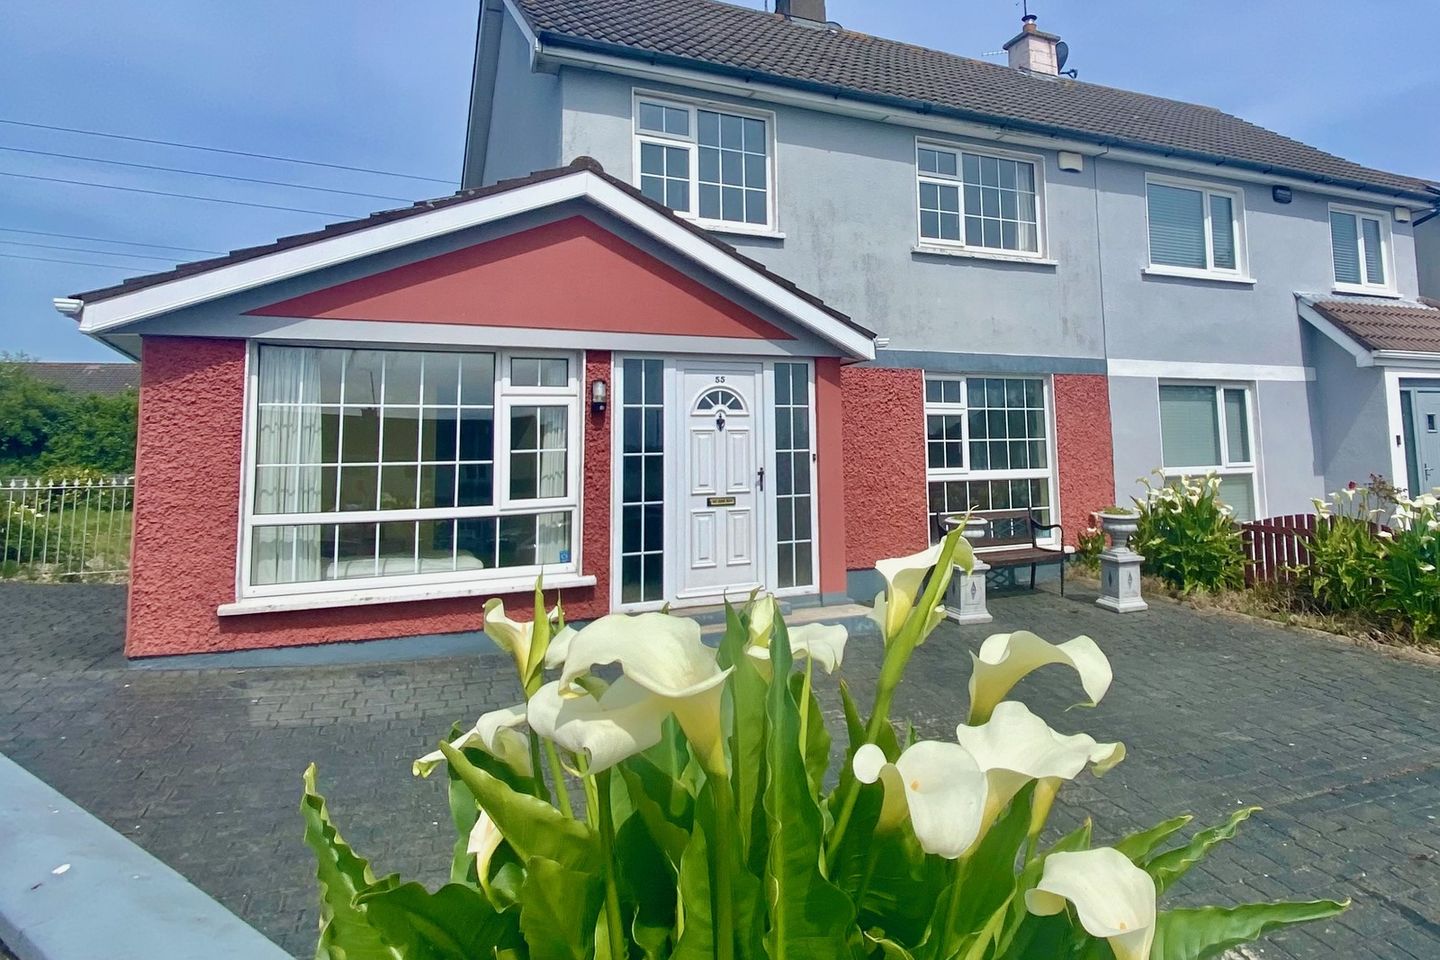 55 Pinewood Estate, Wexford Town, Co. Wexford, Y35H79Y